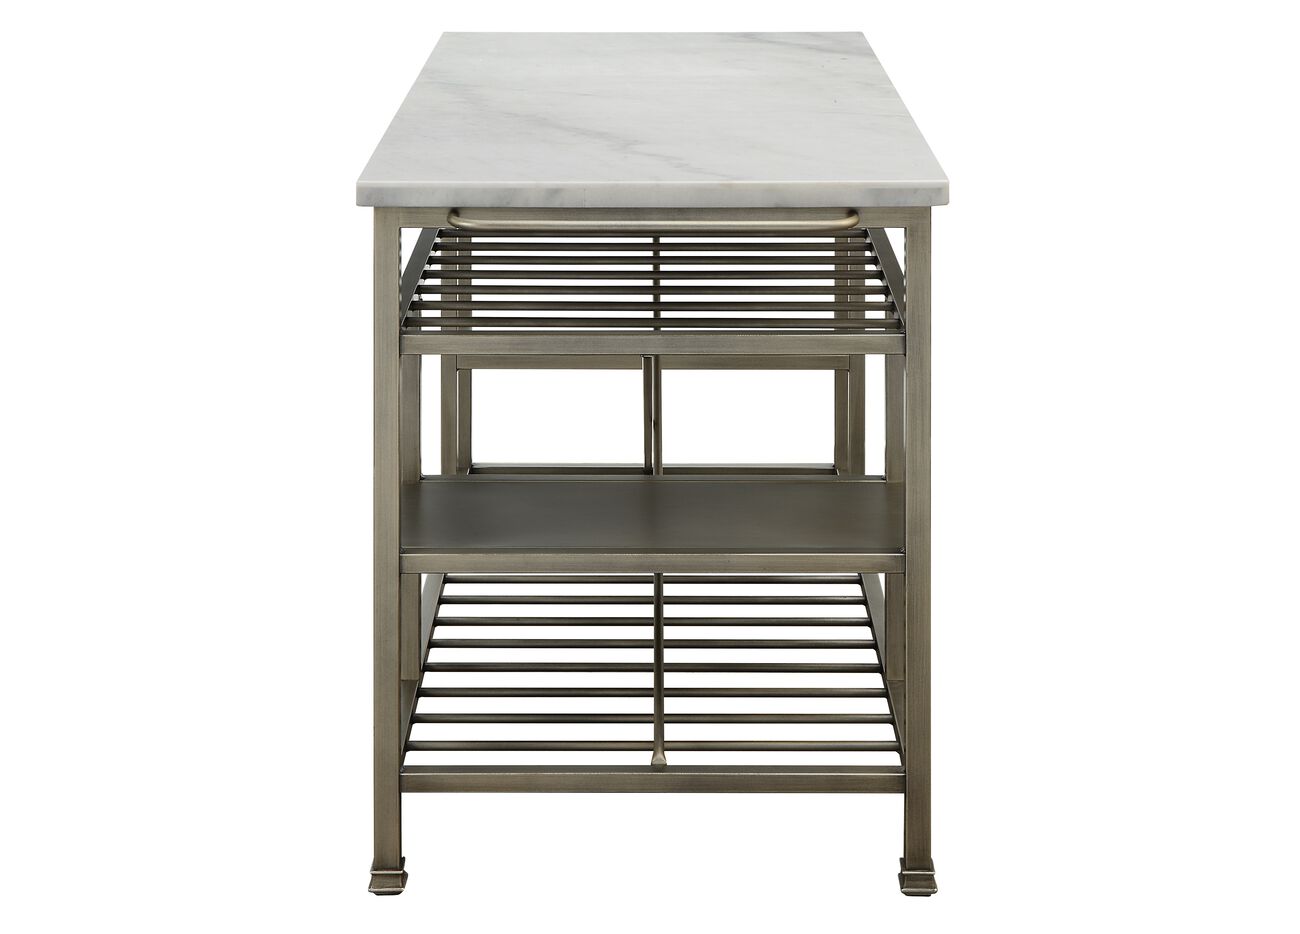 Marble Top Metal Kitchen Island with 2 Slated Shelves, Gray and White